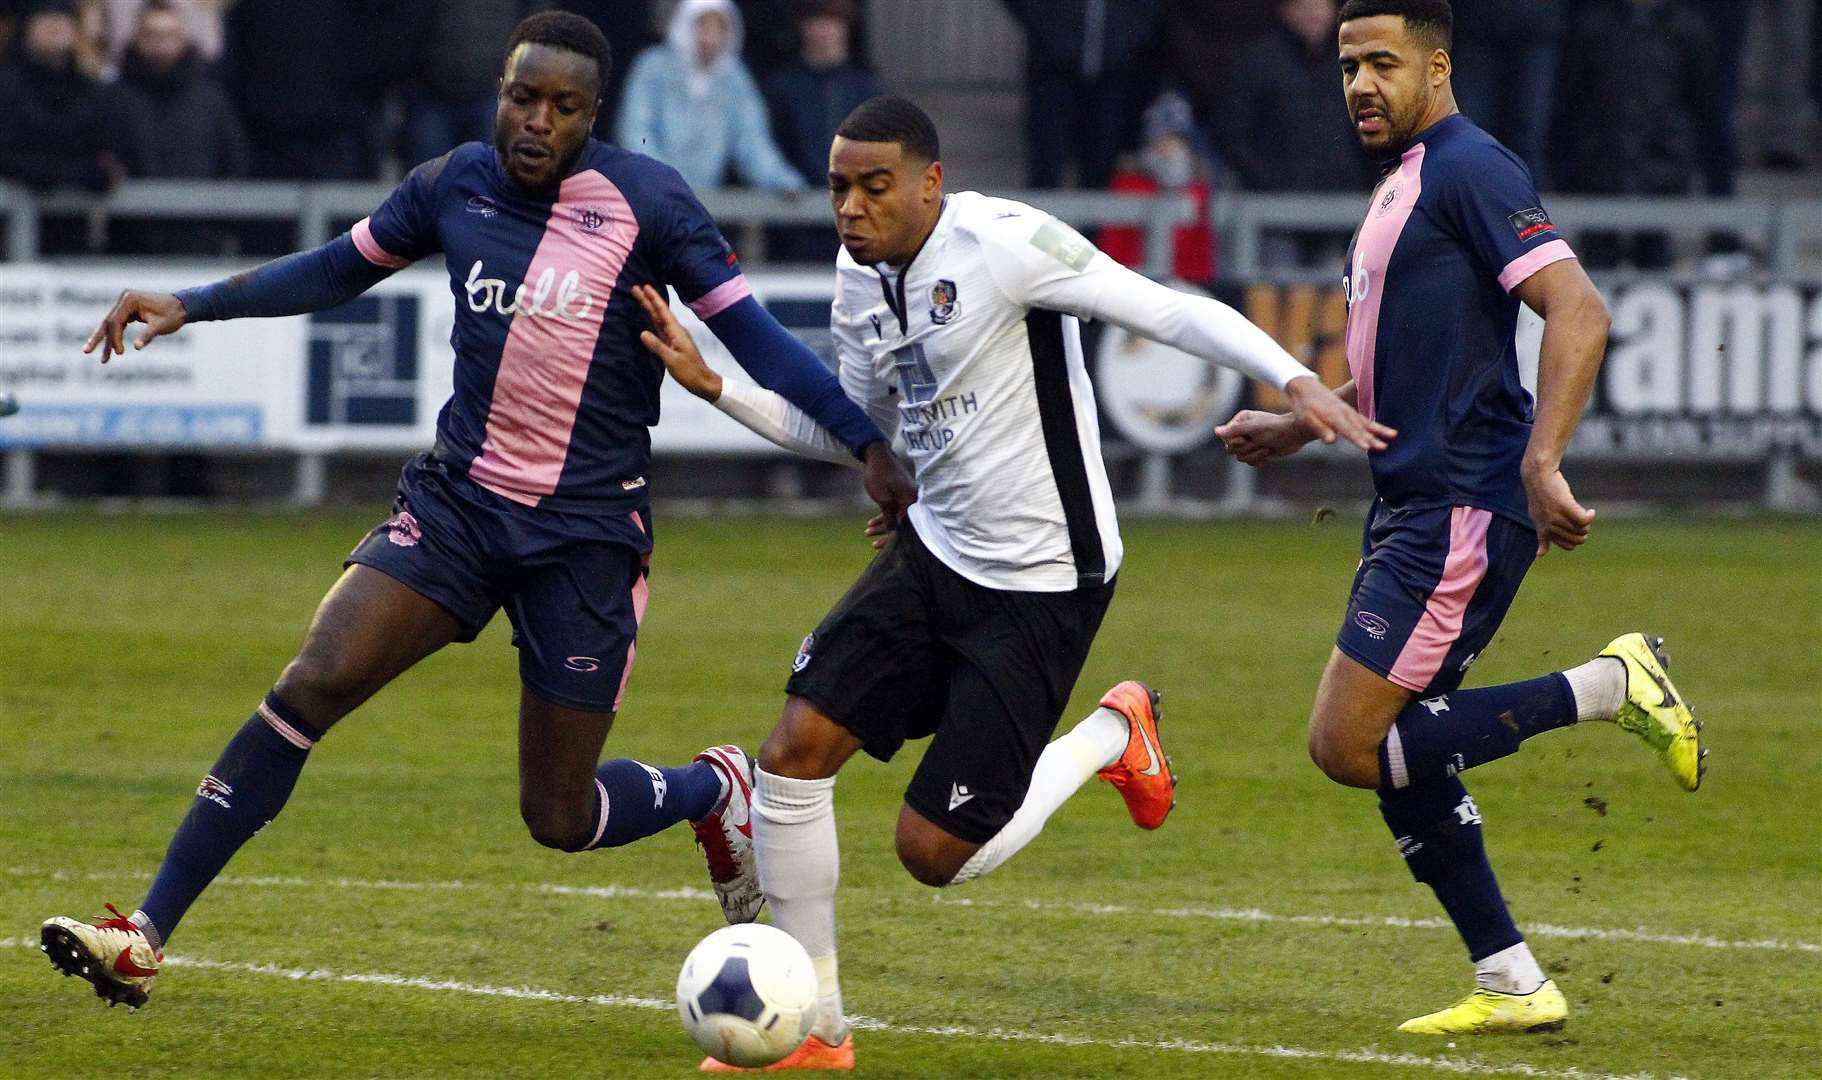 Tyrique Hyde in action for Dartford during the 2019/20 campaign. Picture: Sean Aidan